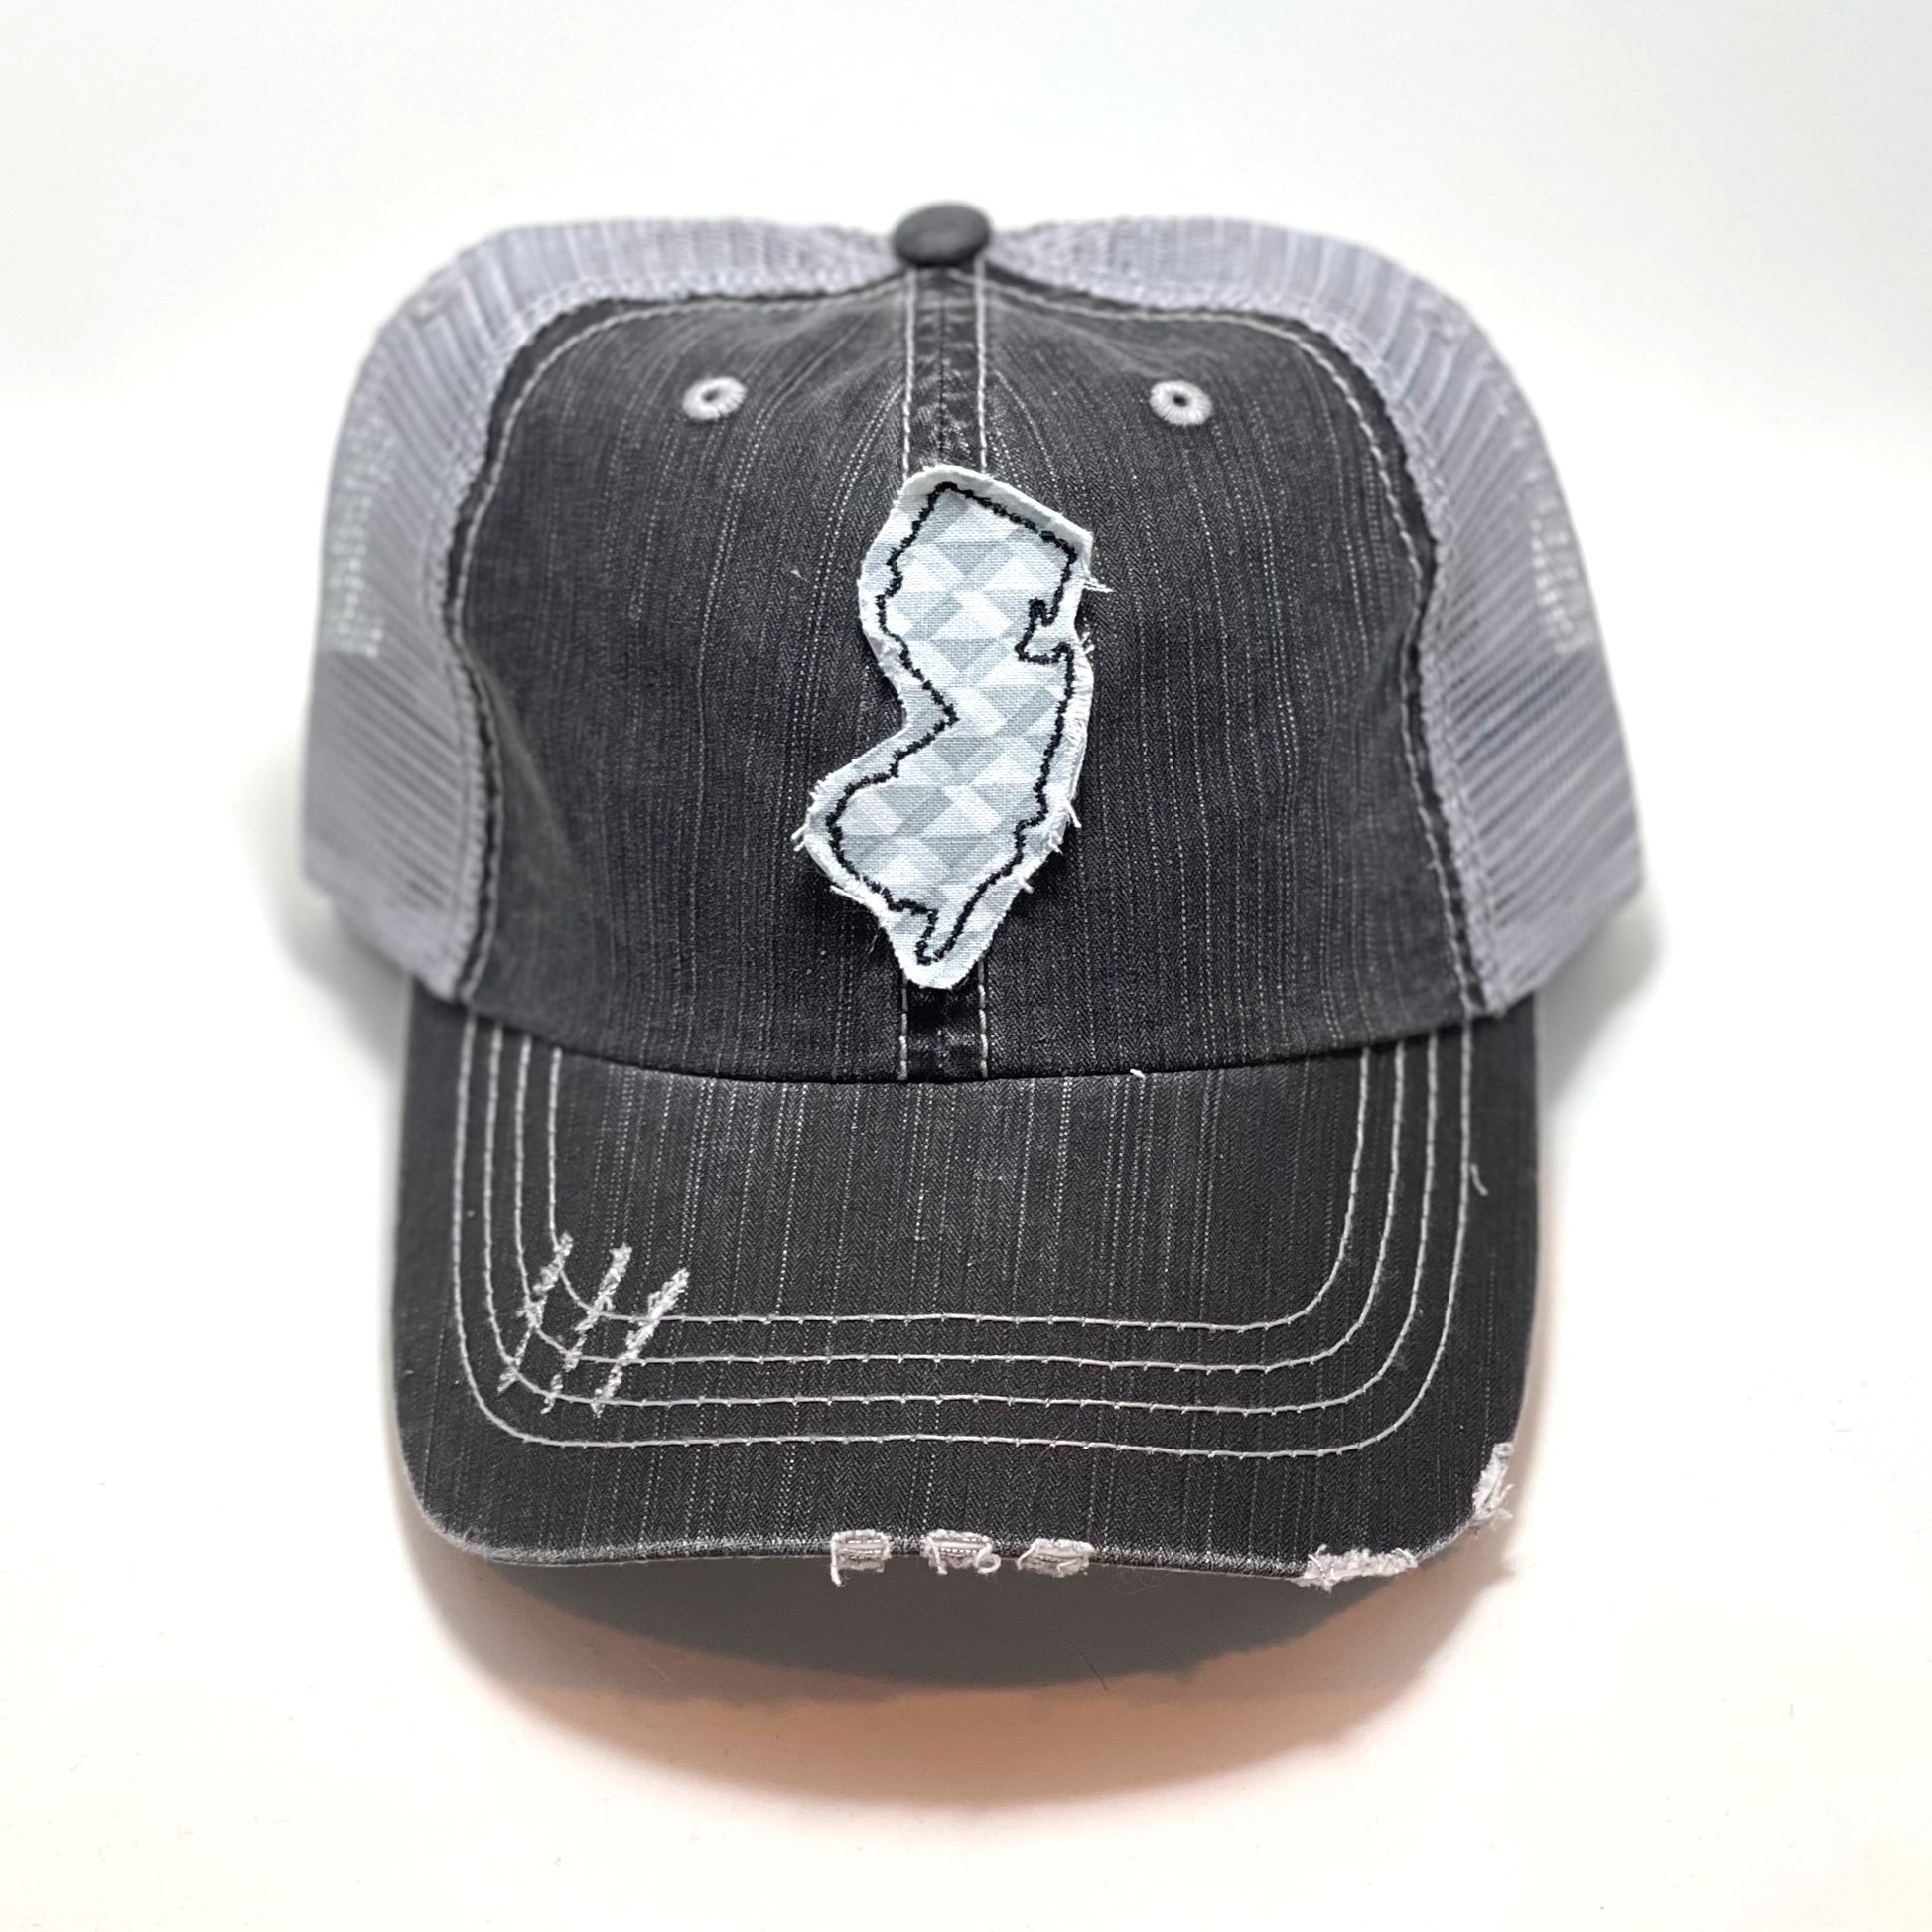 gray distressed trucker hat with gray floral fabric state of New Jersey